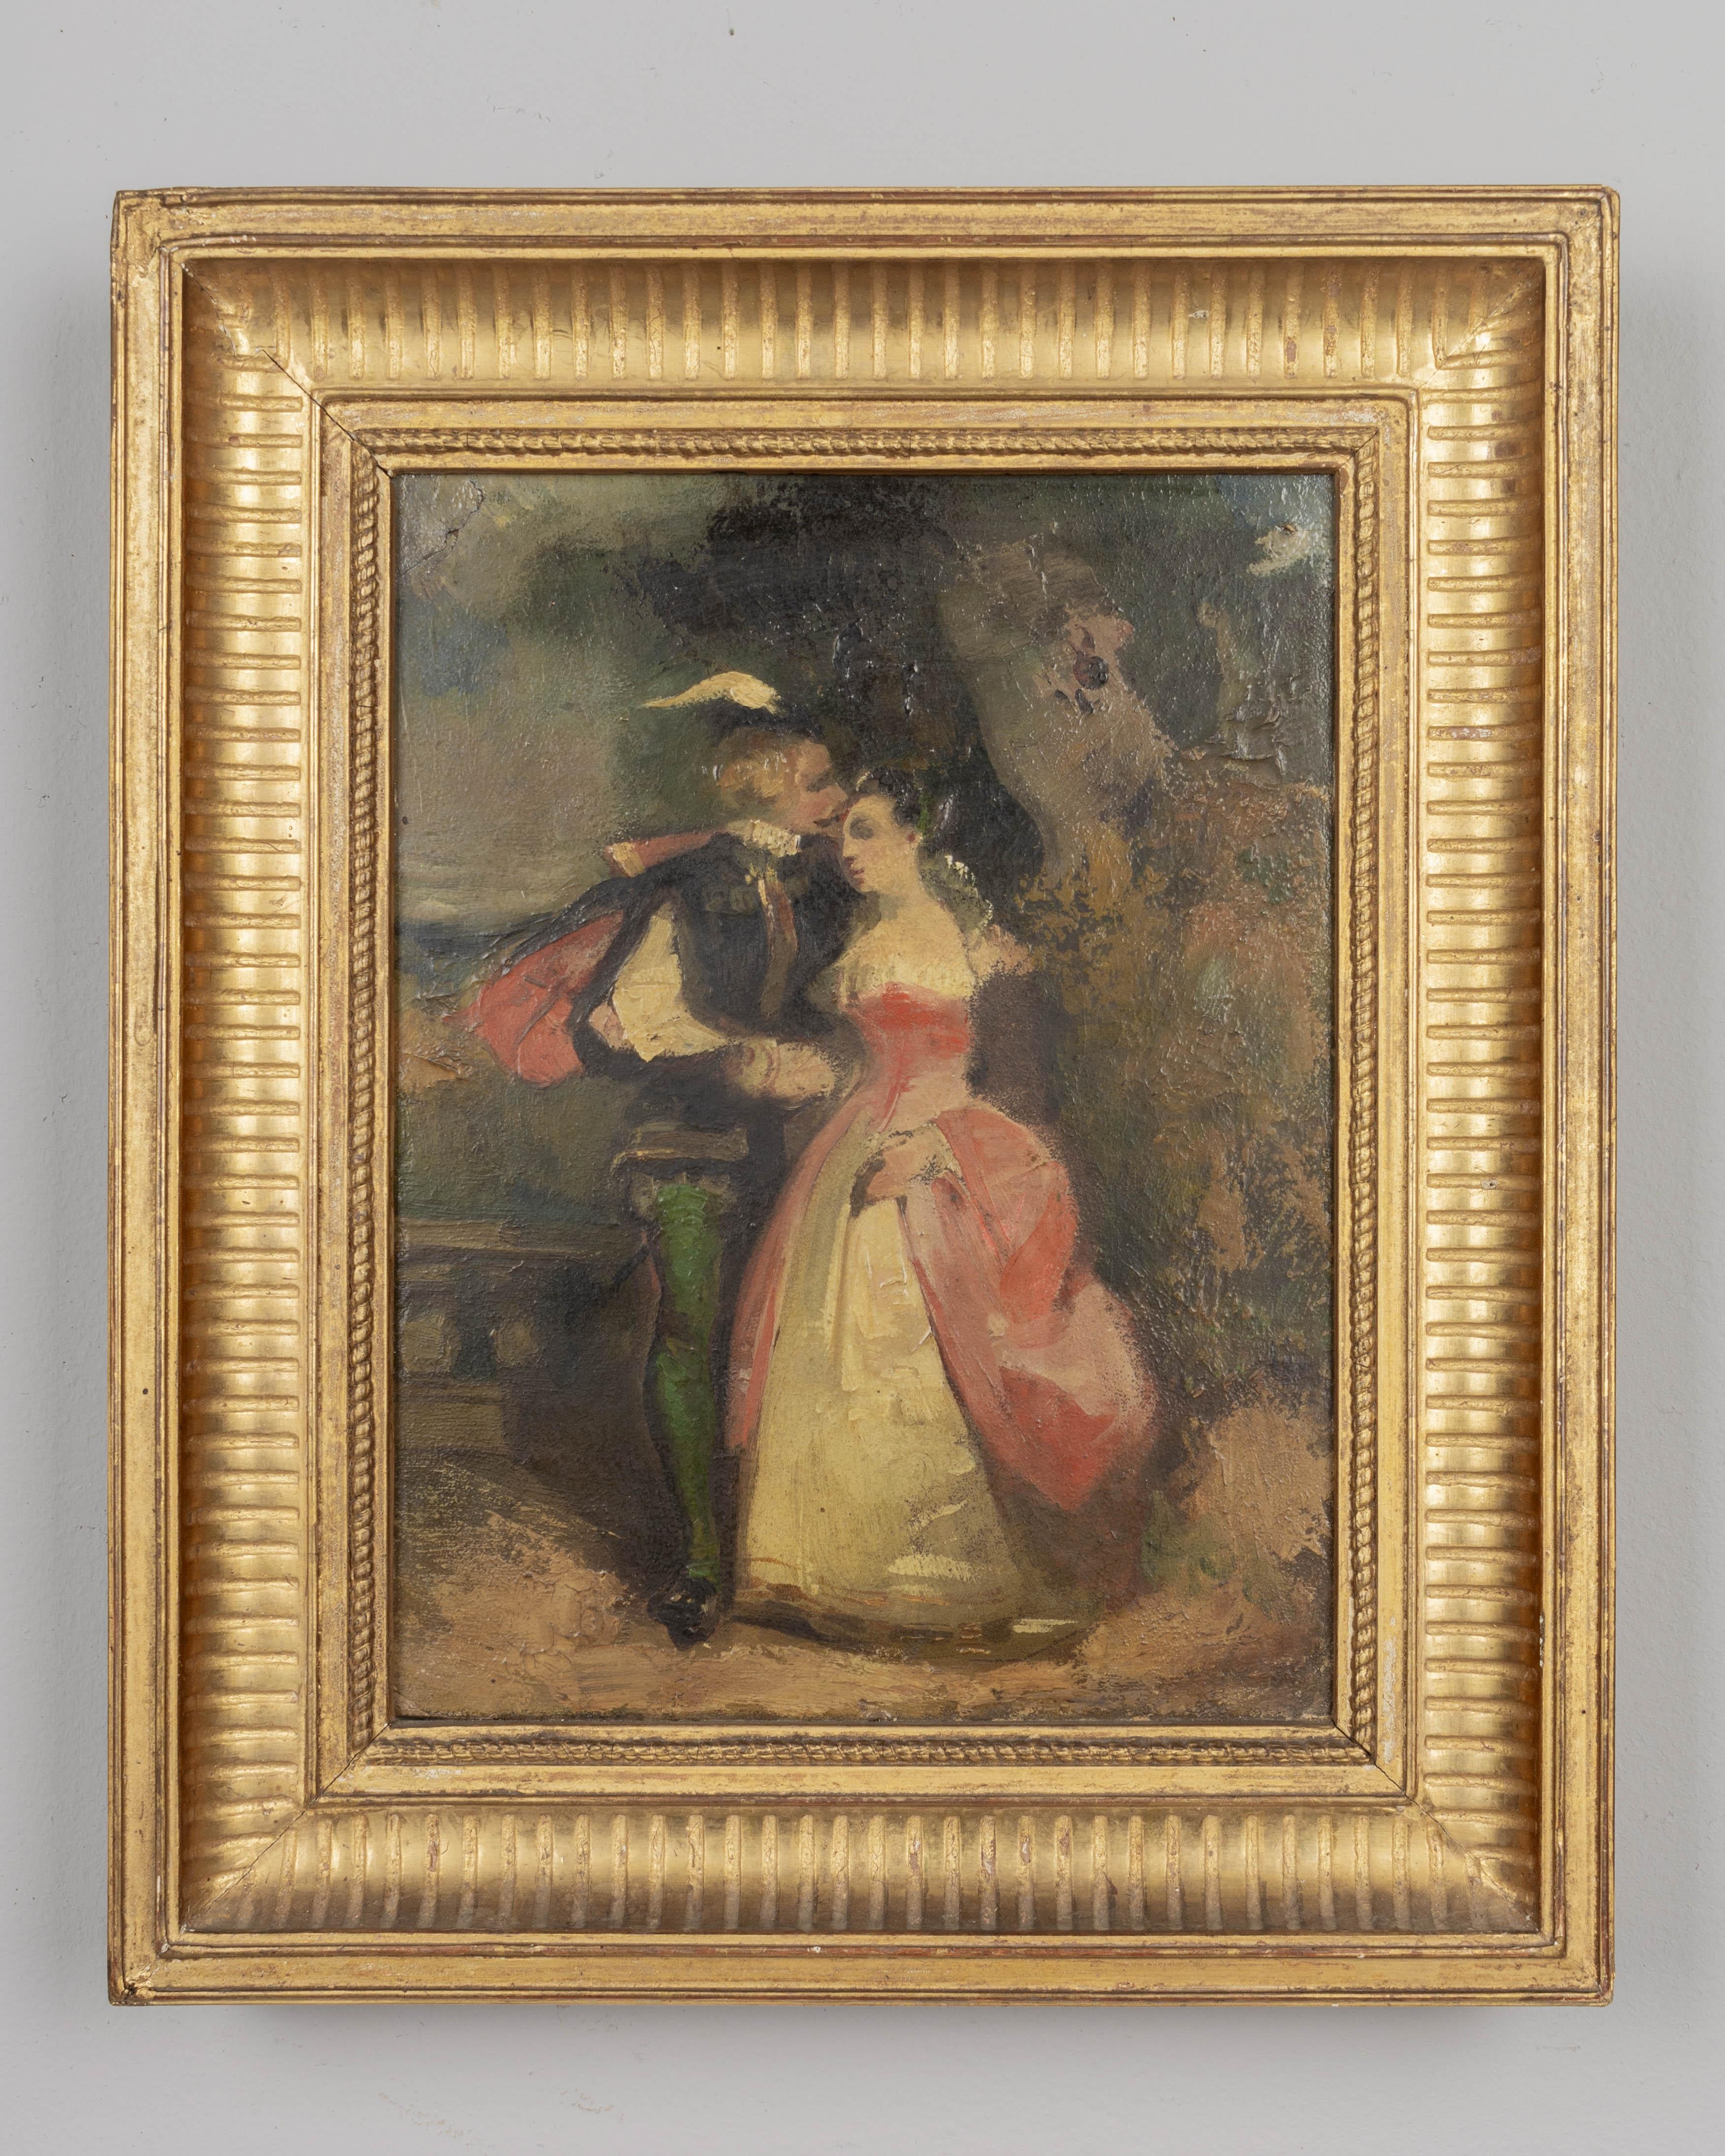 An 19th Century French painting by Eugène Devéria (1805-1865)
A romantic sketch depicting a courting couple. 
Oil on board with gilt frame. Circa 1840-1850
Minor gilt touch-up to corners of frame. 
Frame: 13.5